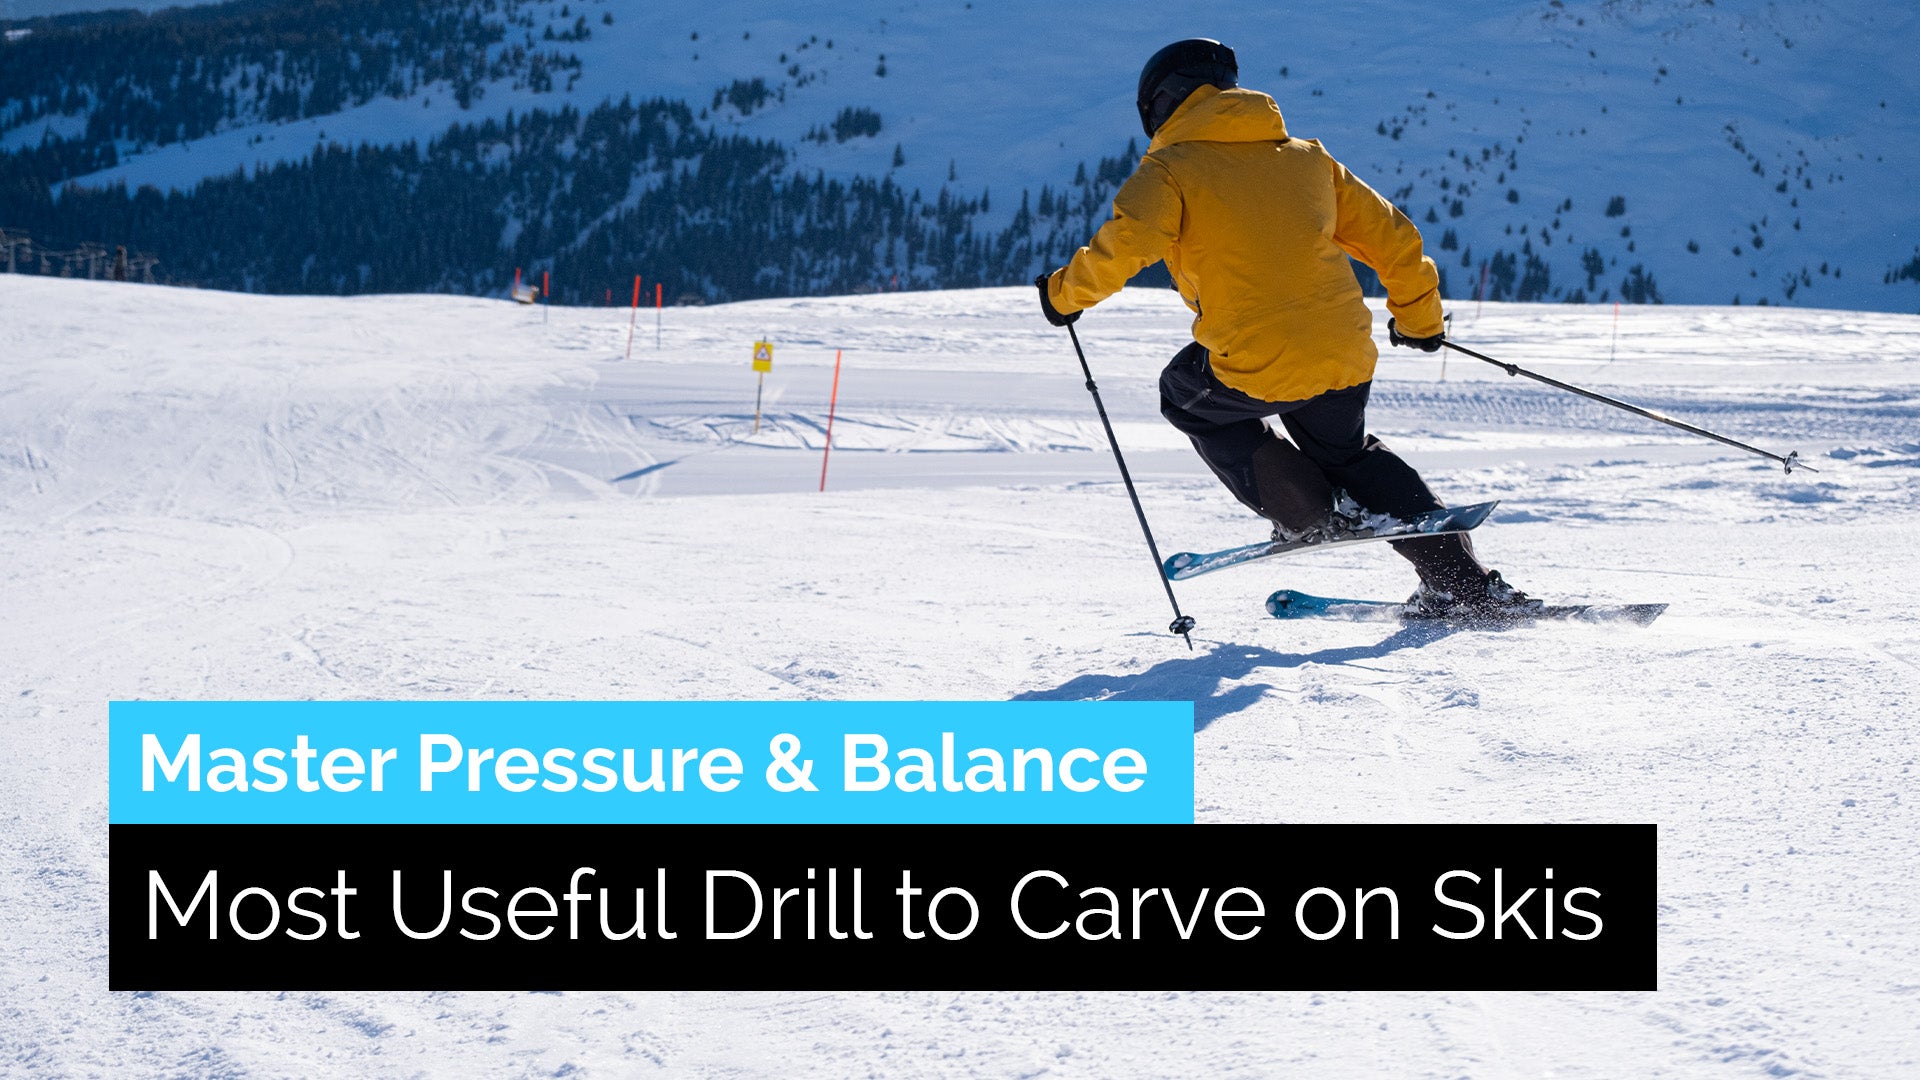 The Most Useful Drill to Better Carve on Skis | Drill Bits